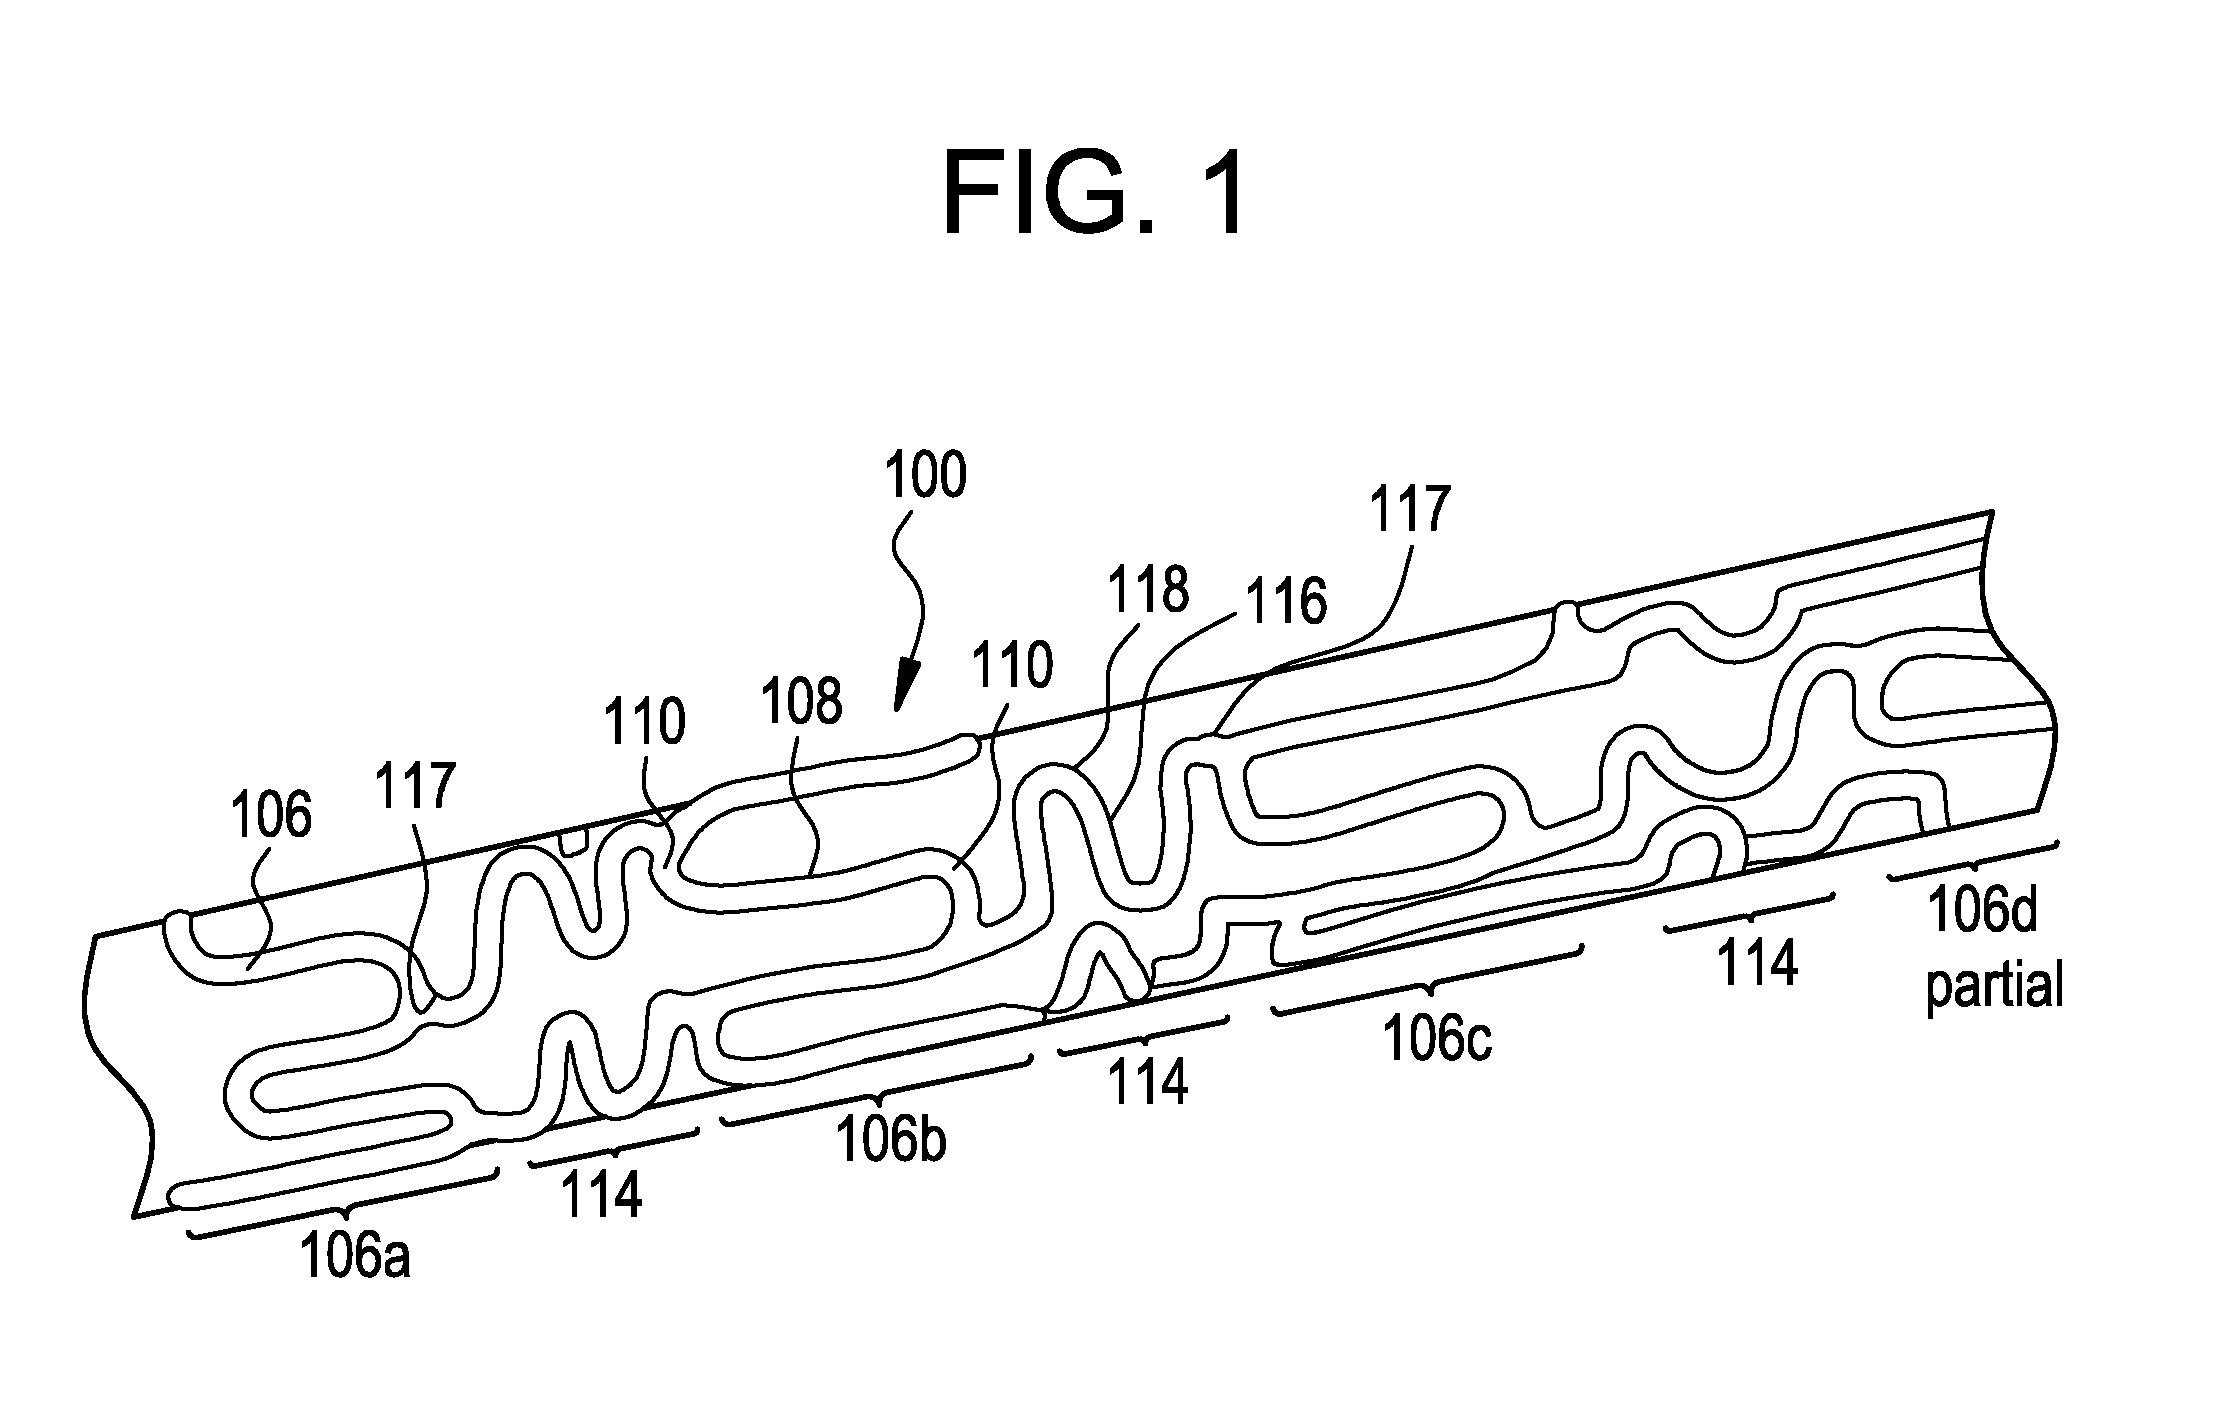 Intraluminal medical device having variable axial flexibility about the circumference of the device